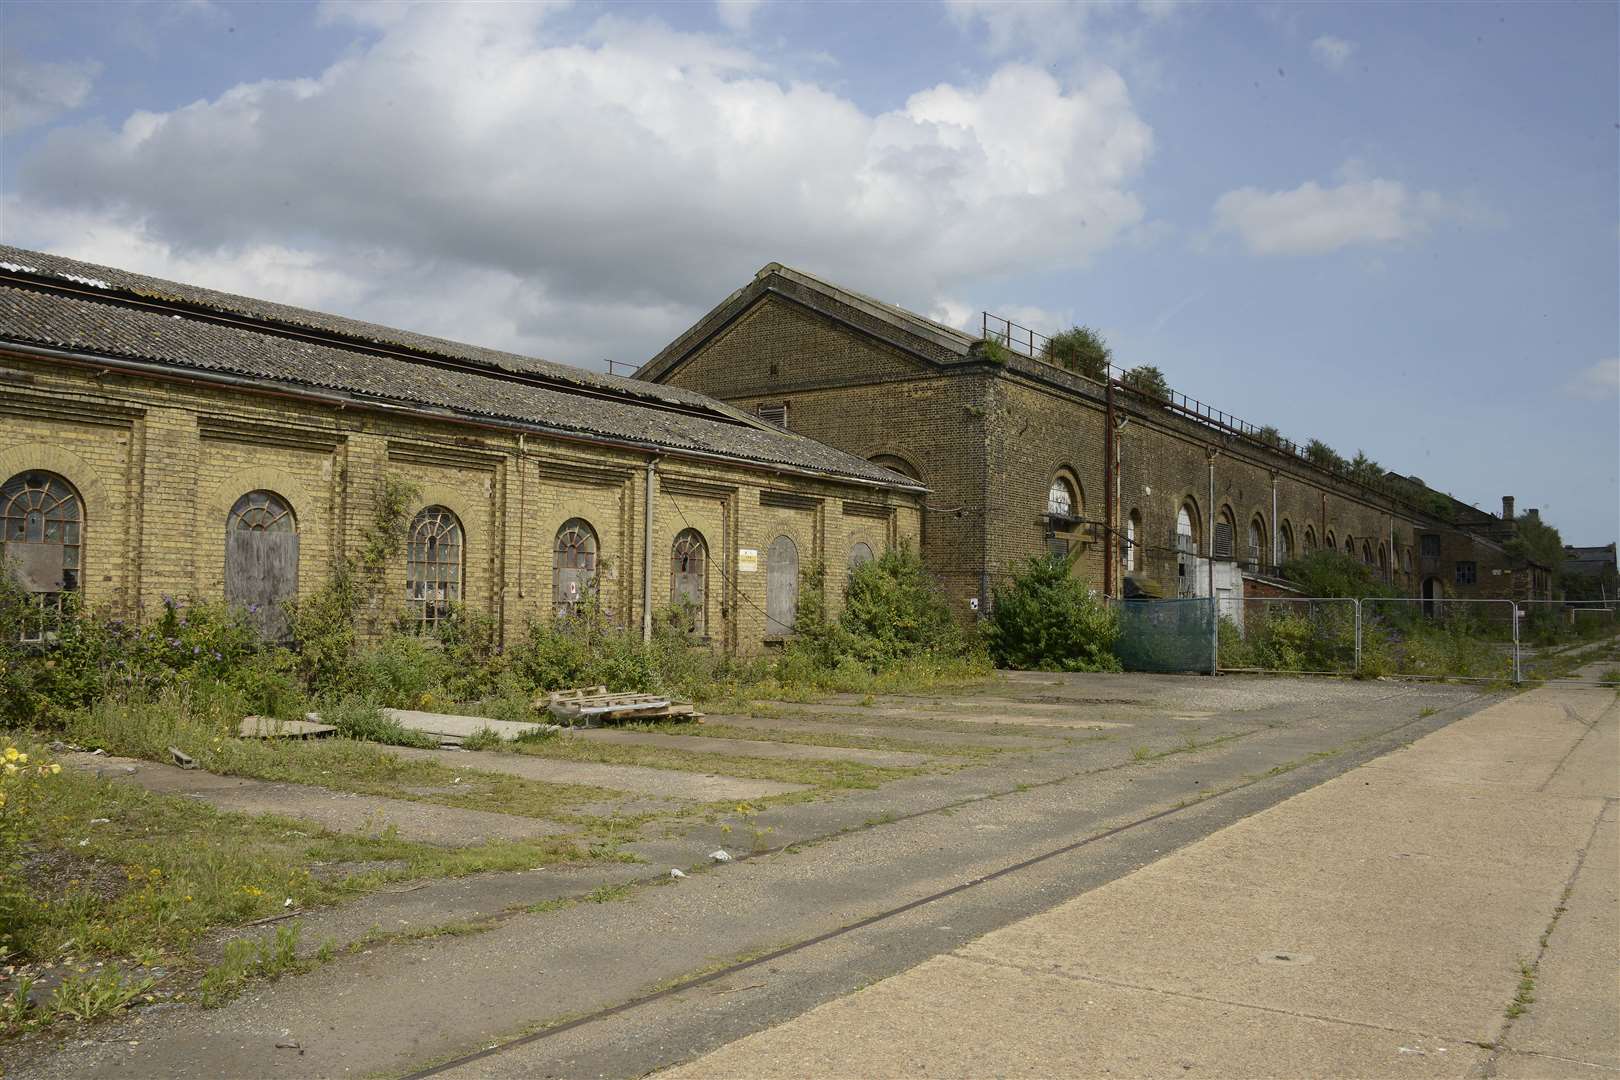 The currently disused site will soon become a creative hub